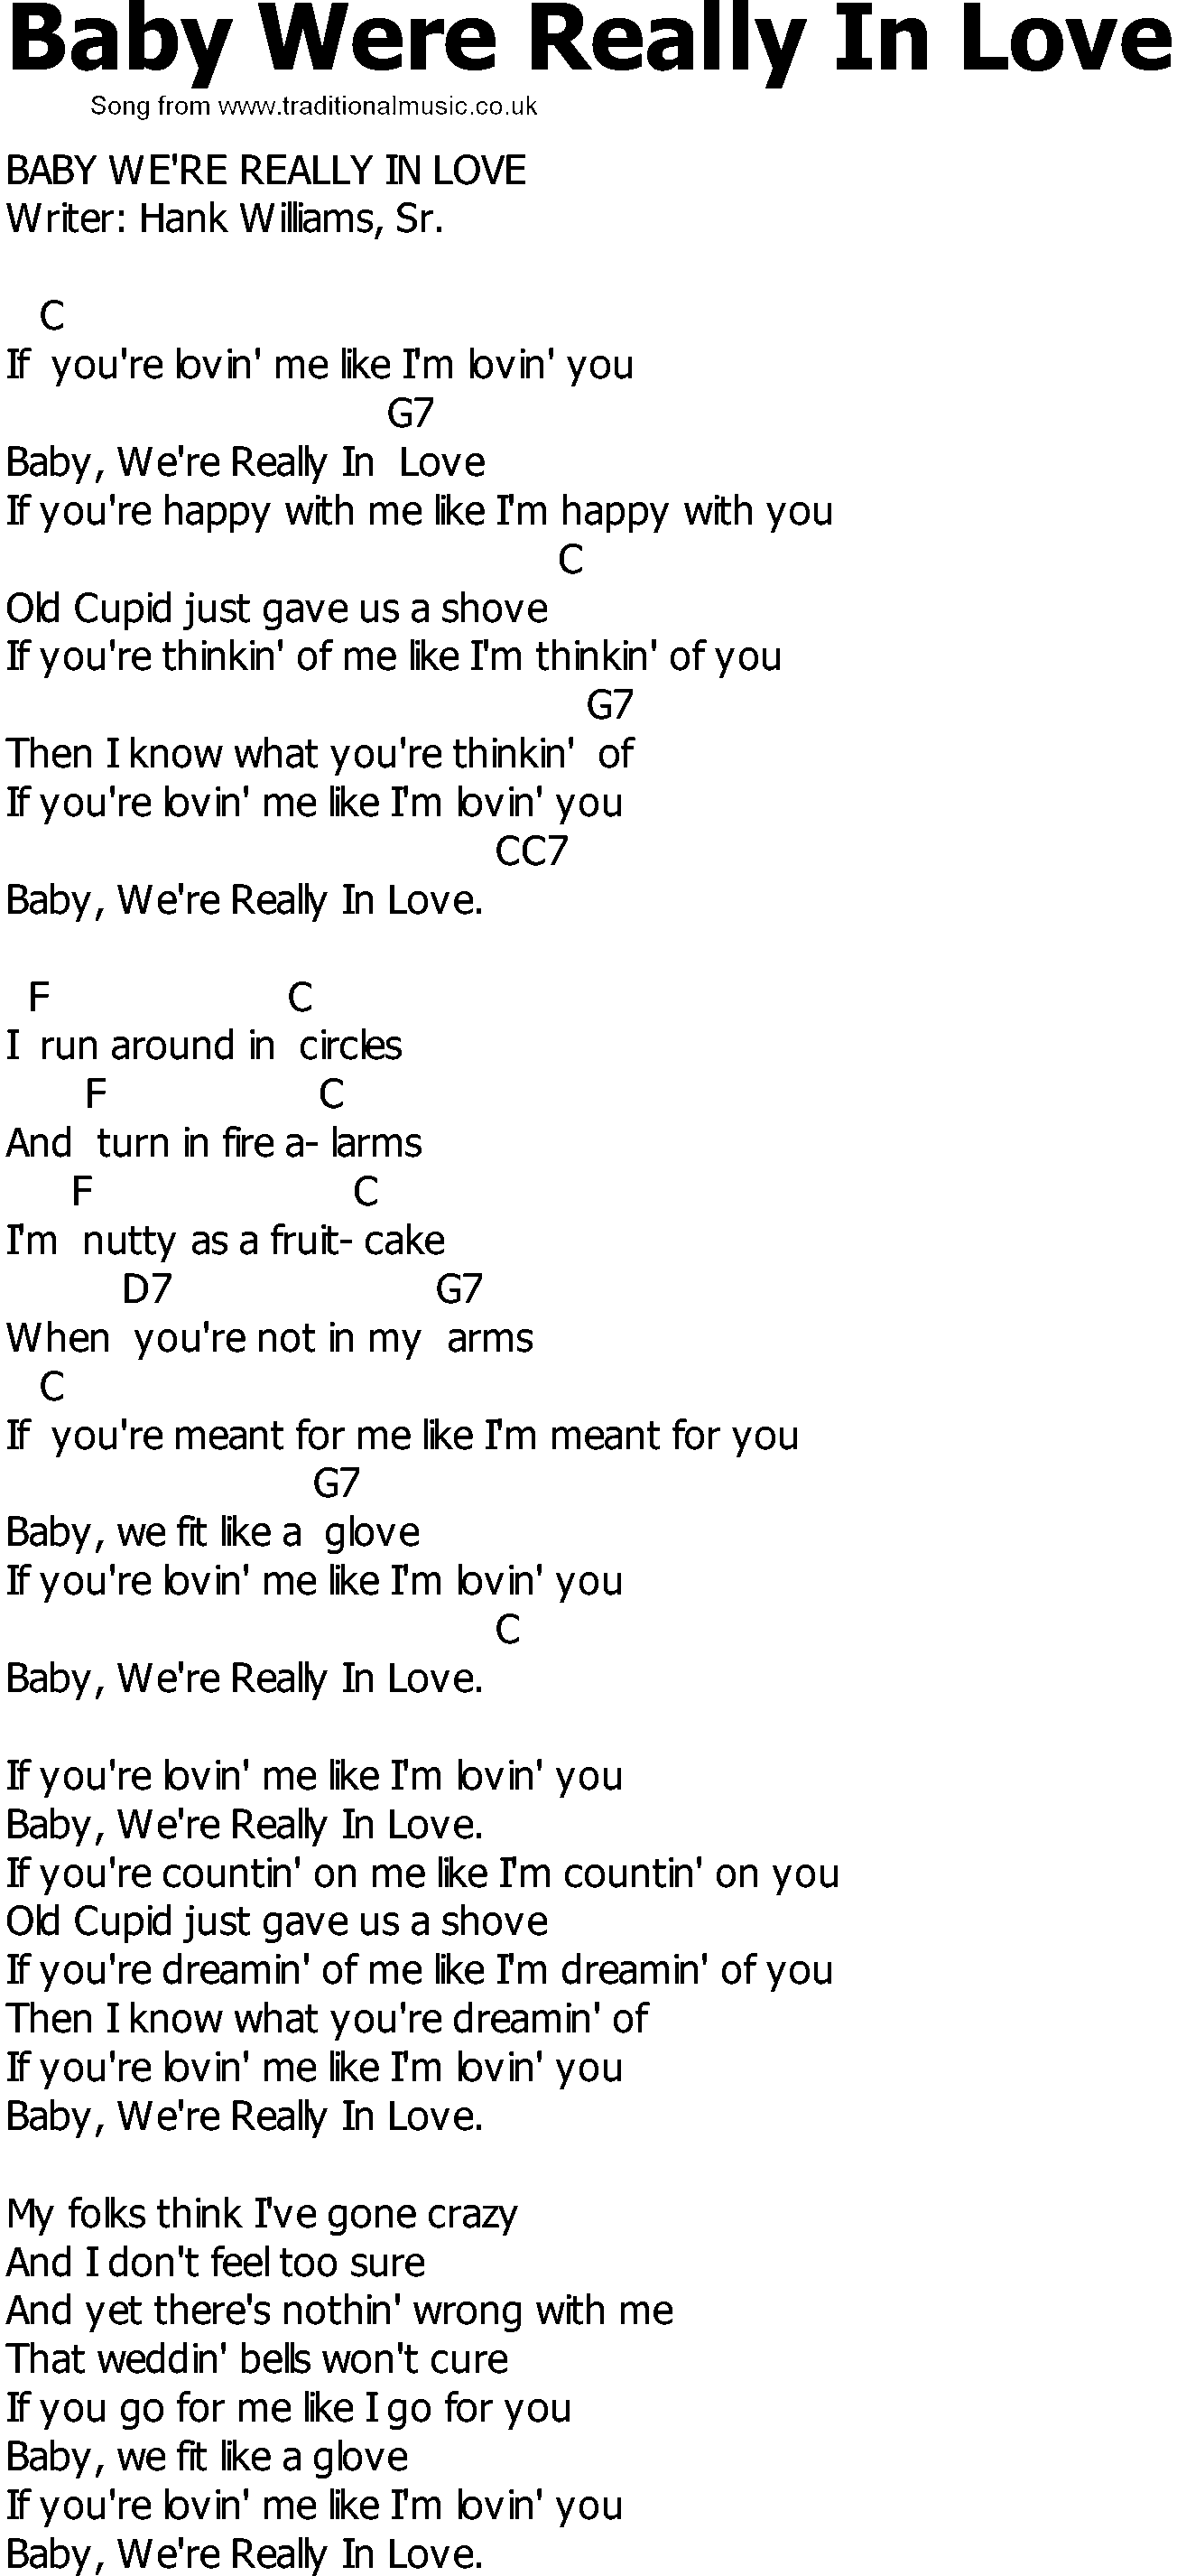 Old Country song lyrics with chords - Baby Were Really In Love